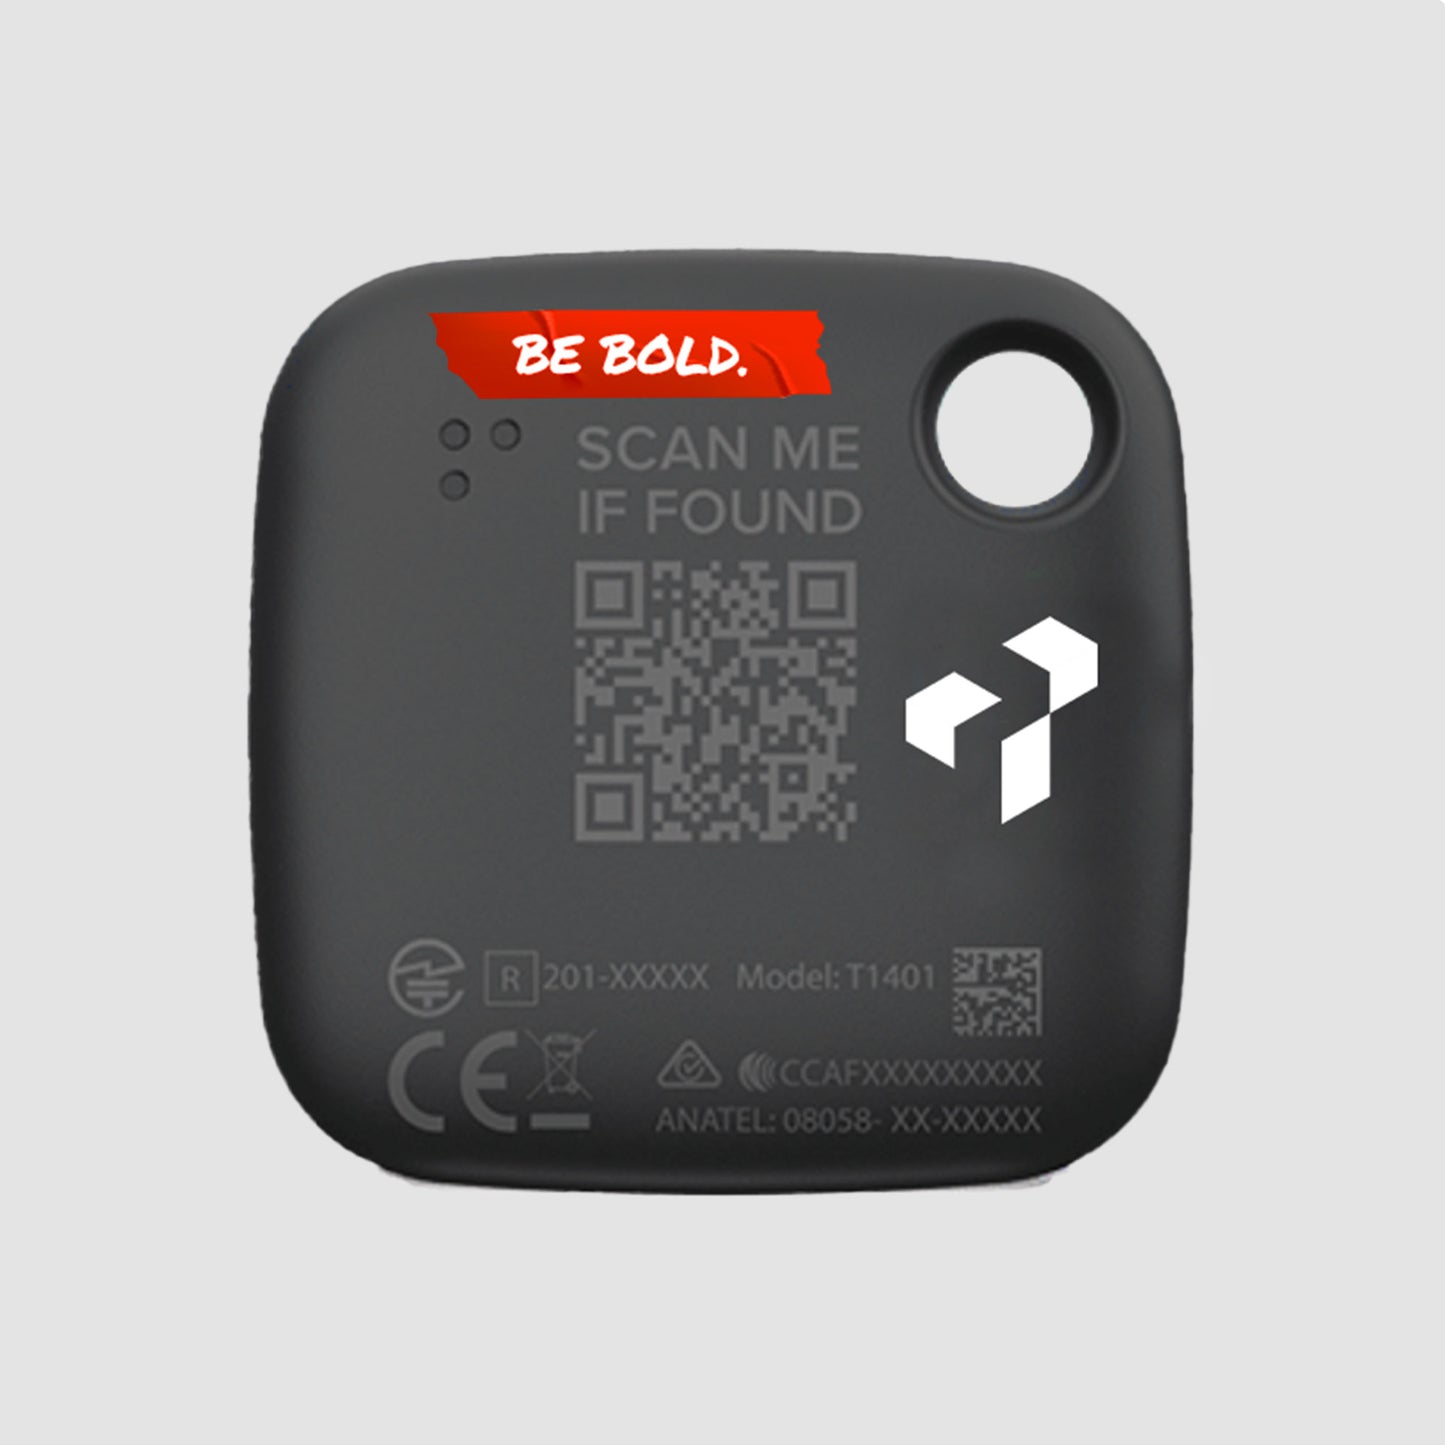 Be Bold Tile Mate® Bluetooth Item Tracker